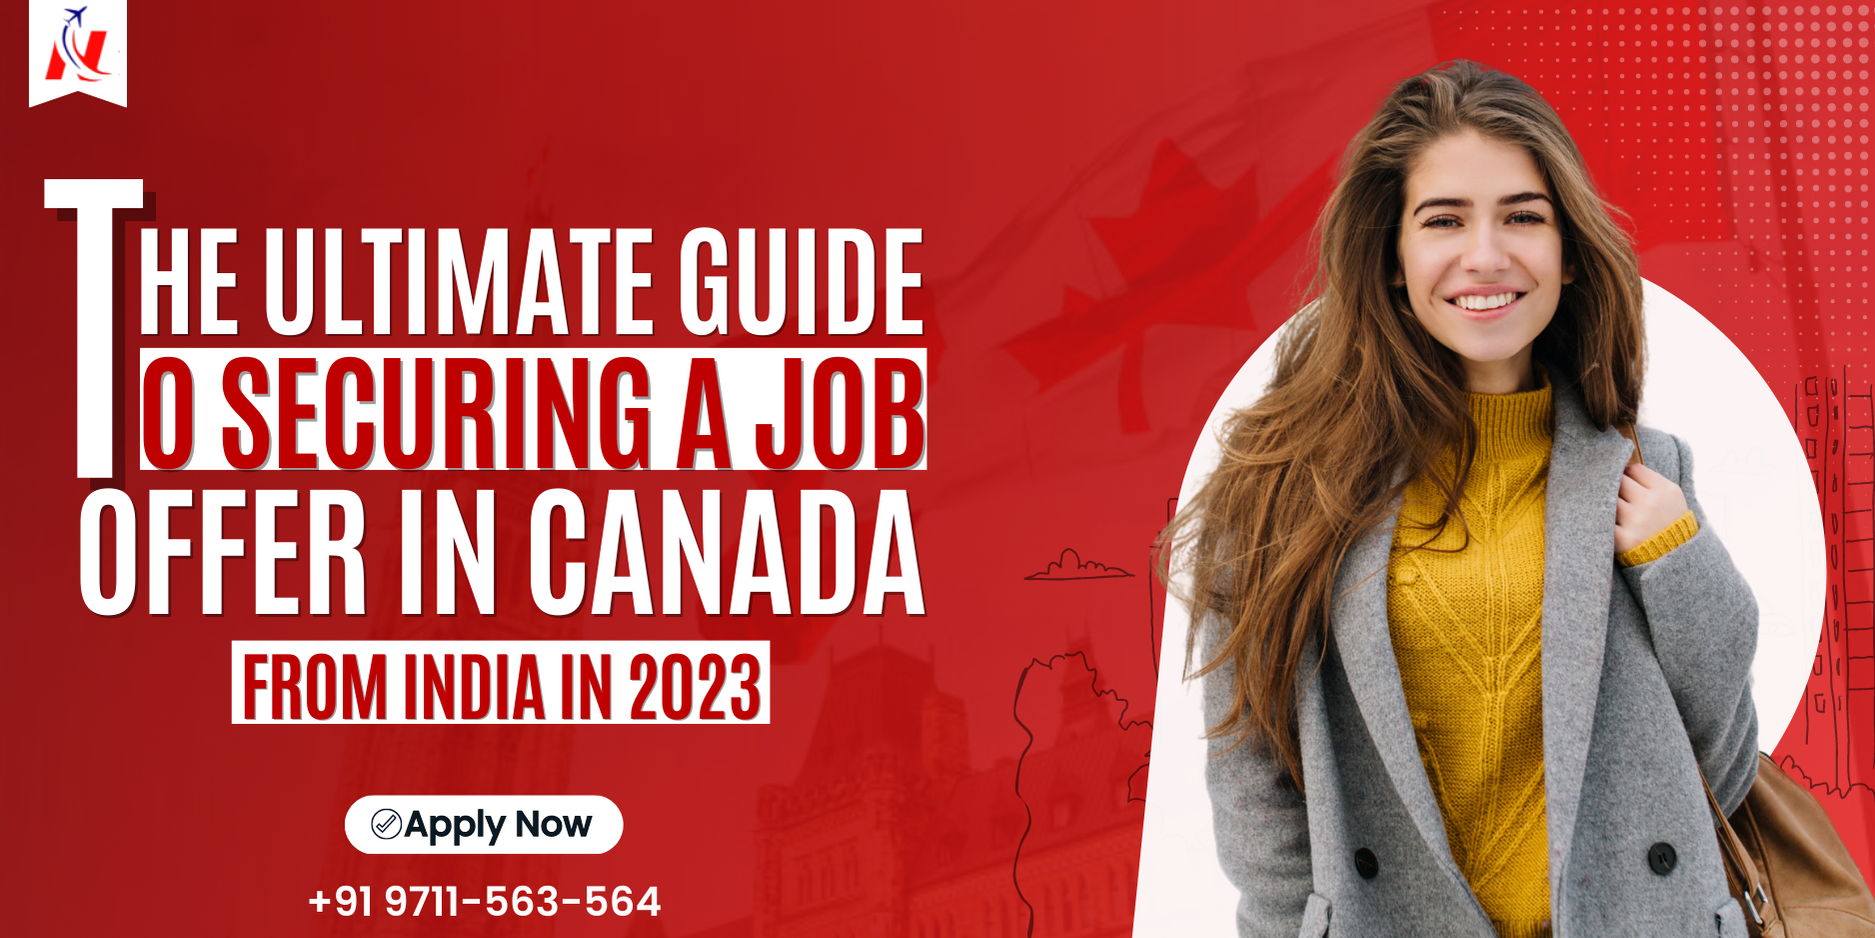 The Ultimate Guide to Securing a Job Offer in Canada from India in 2023